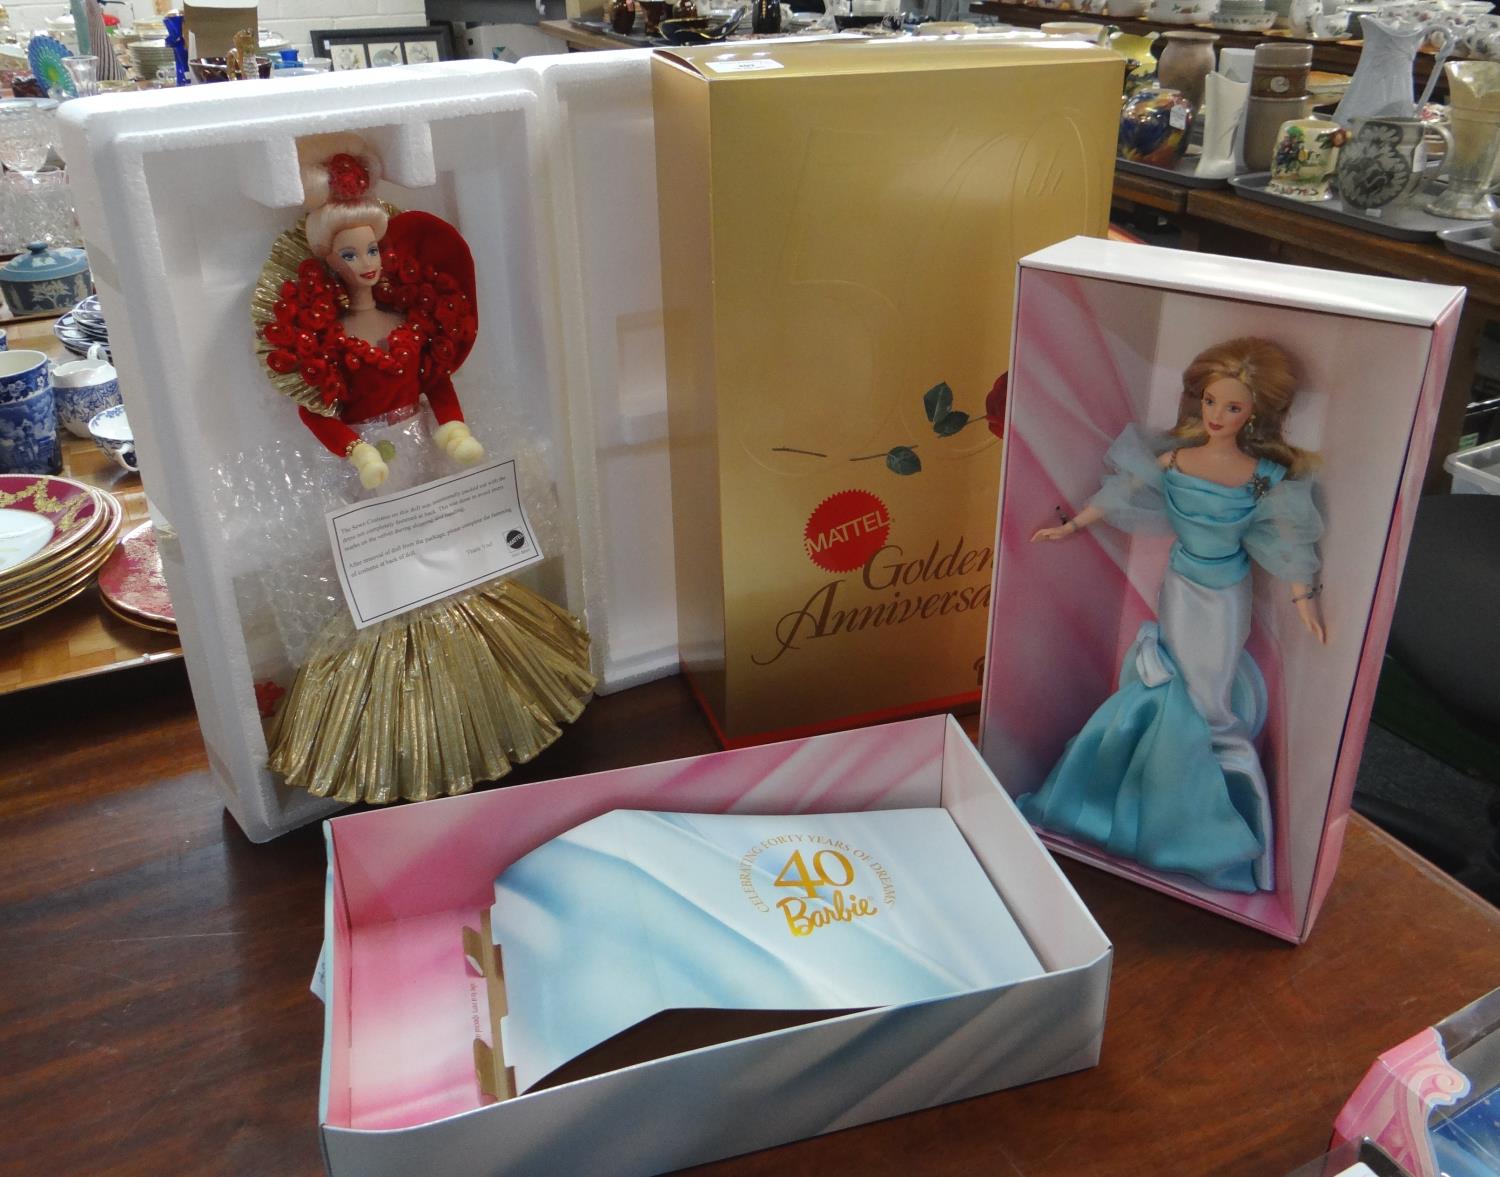 Mattel Golden Anniversary 1945-1995 Barbie doll in original box together with a limited edition